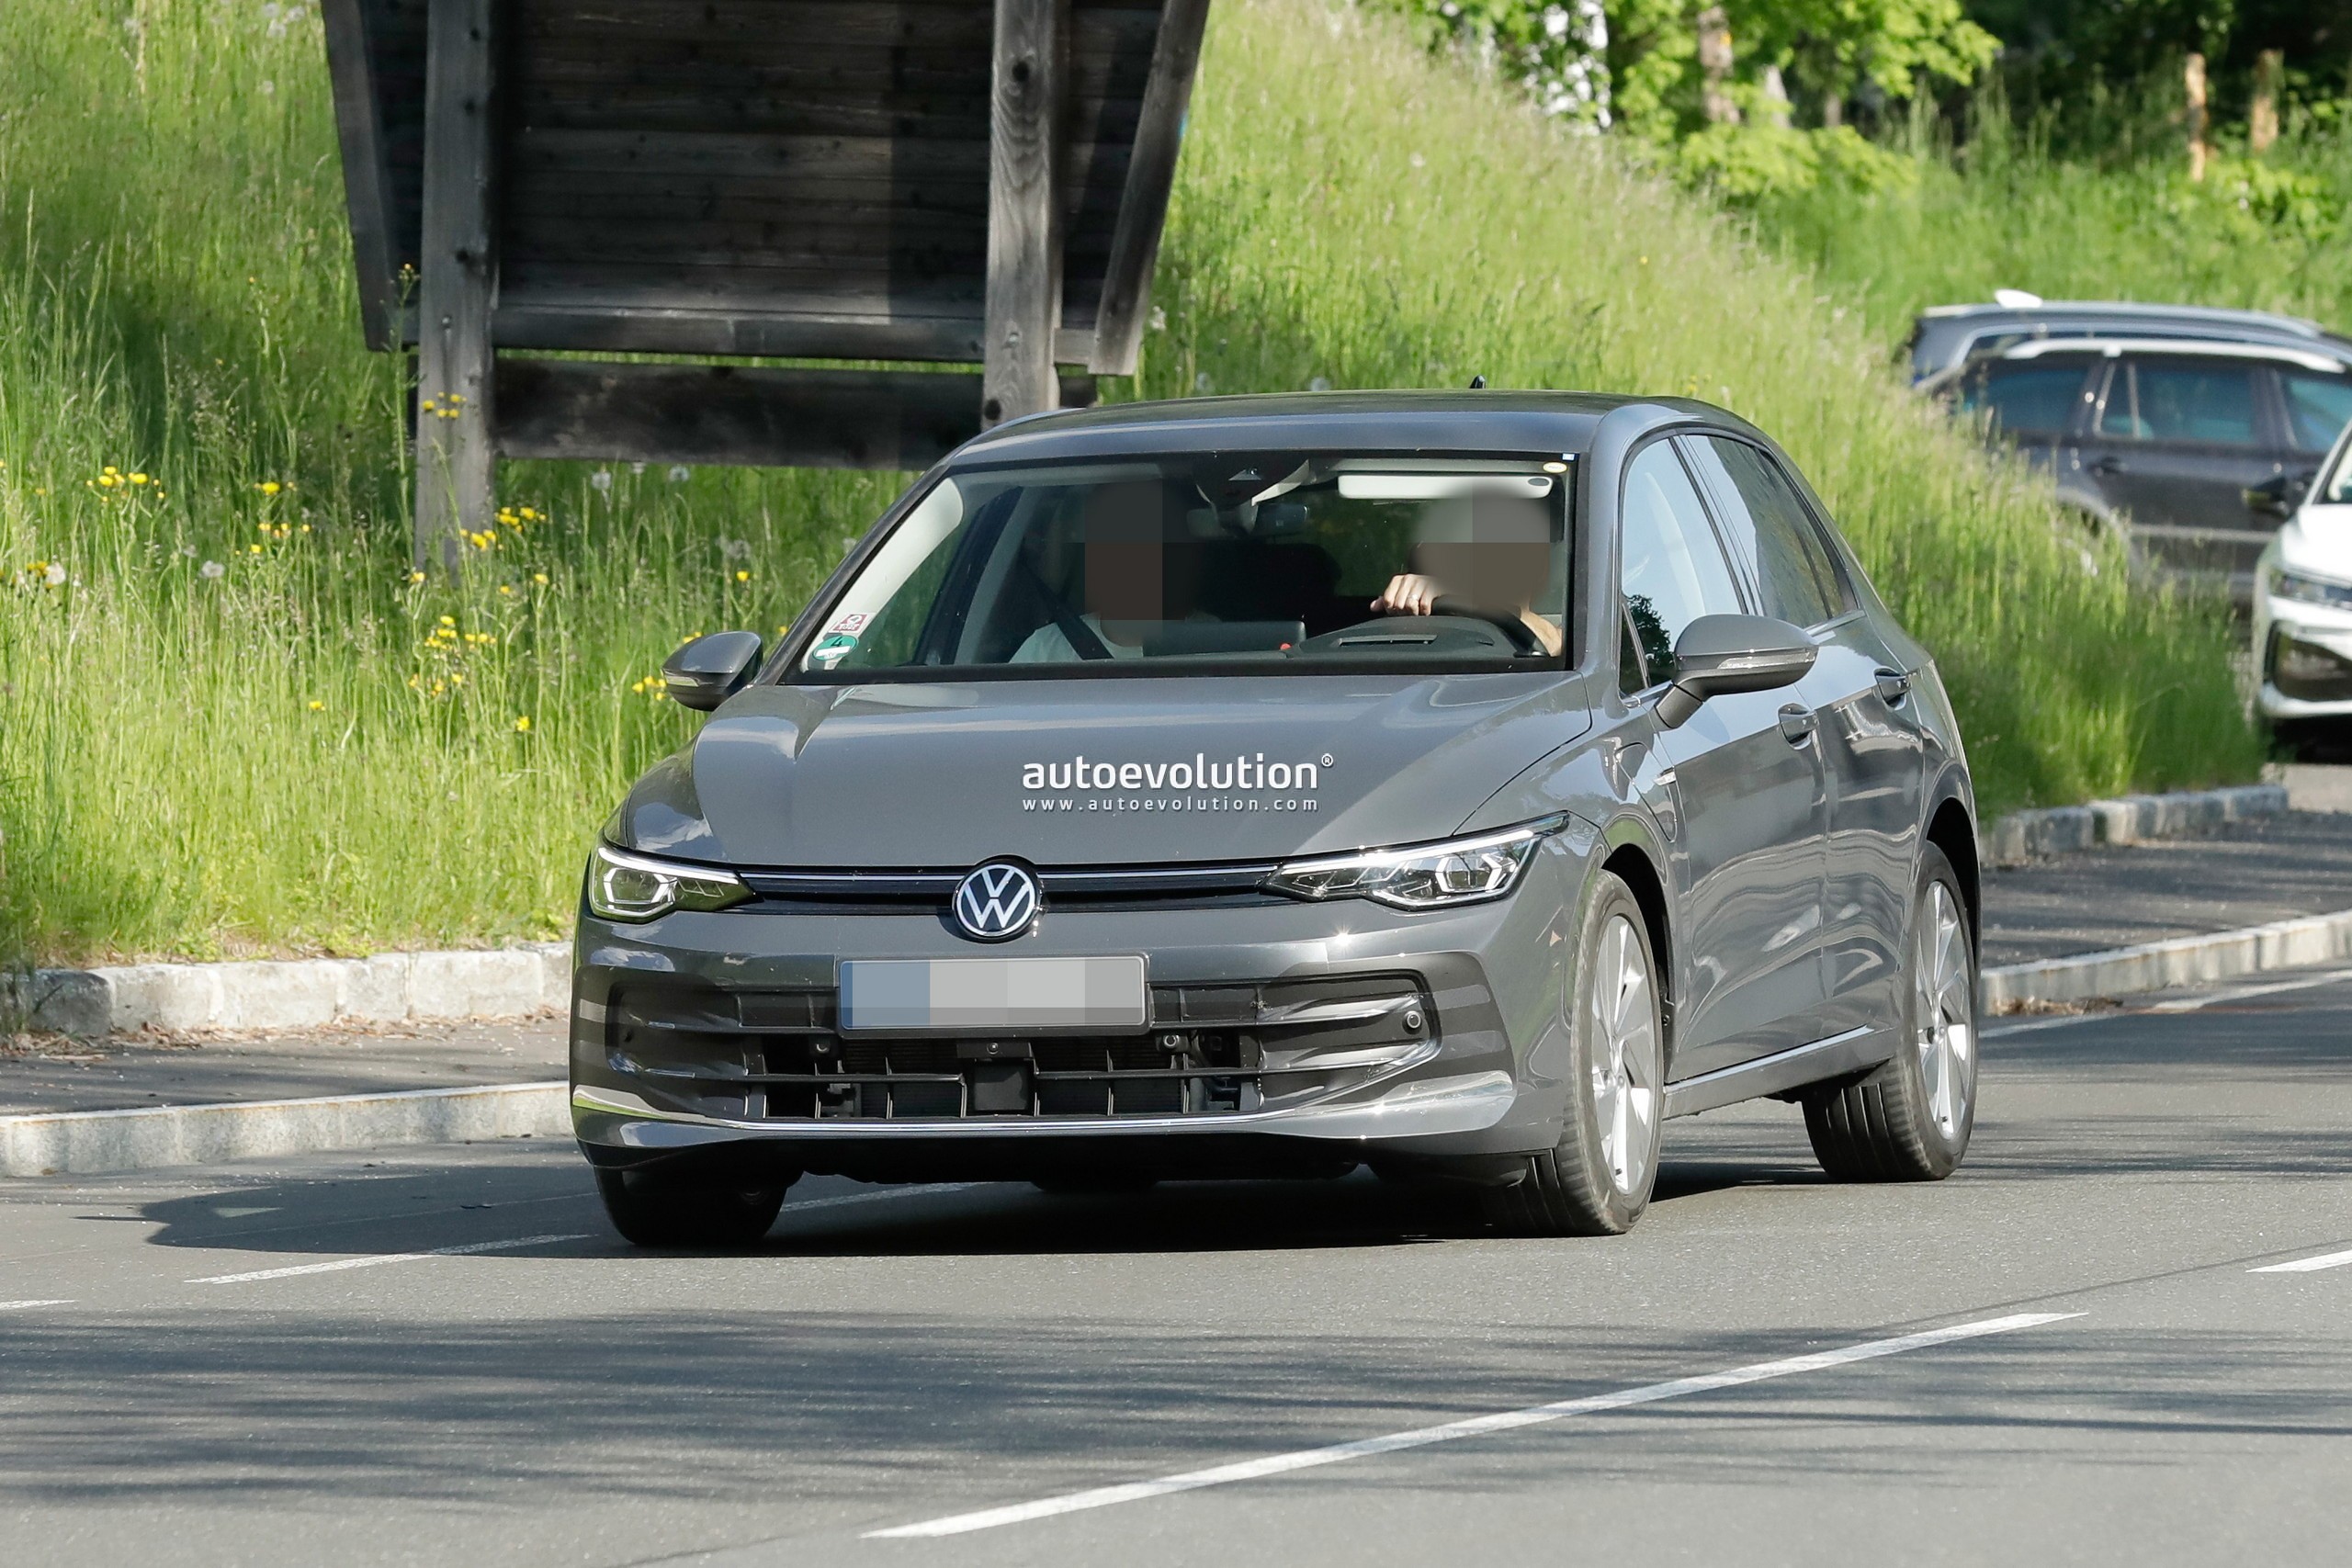 2024 Vw Golf Caught Undisguised Facelifted Hatch Shows Big Infotainment Screen 9 